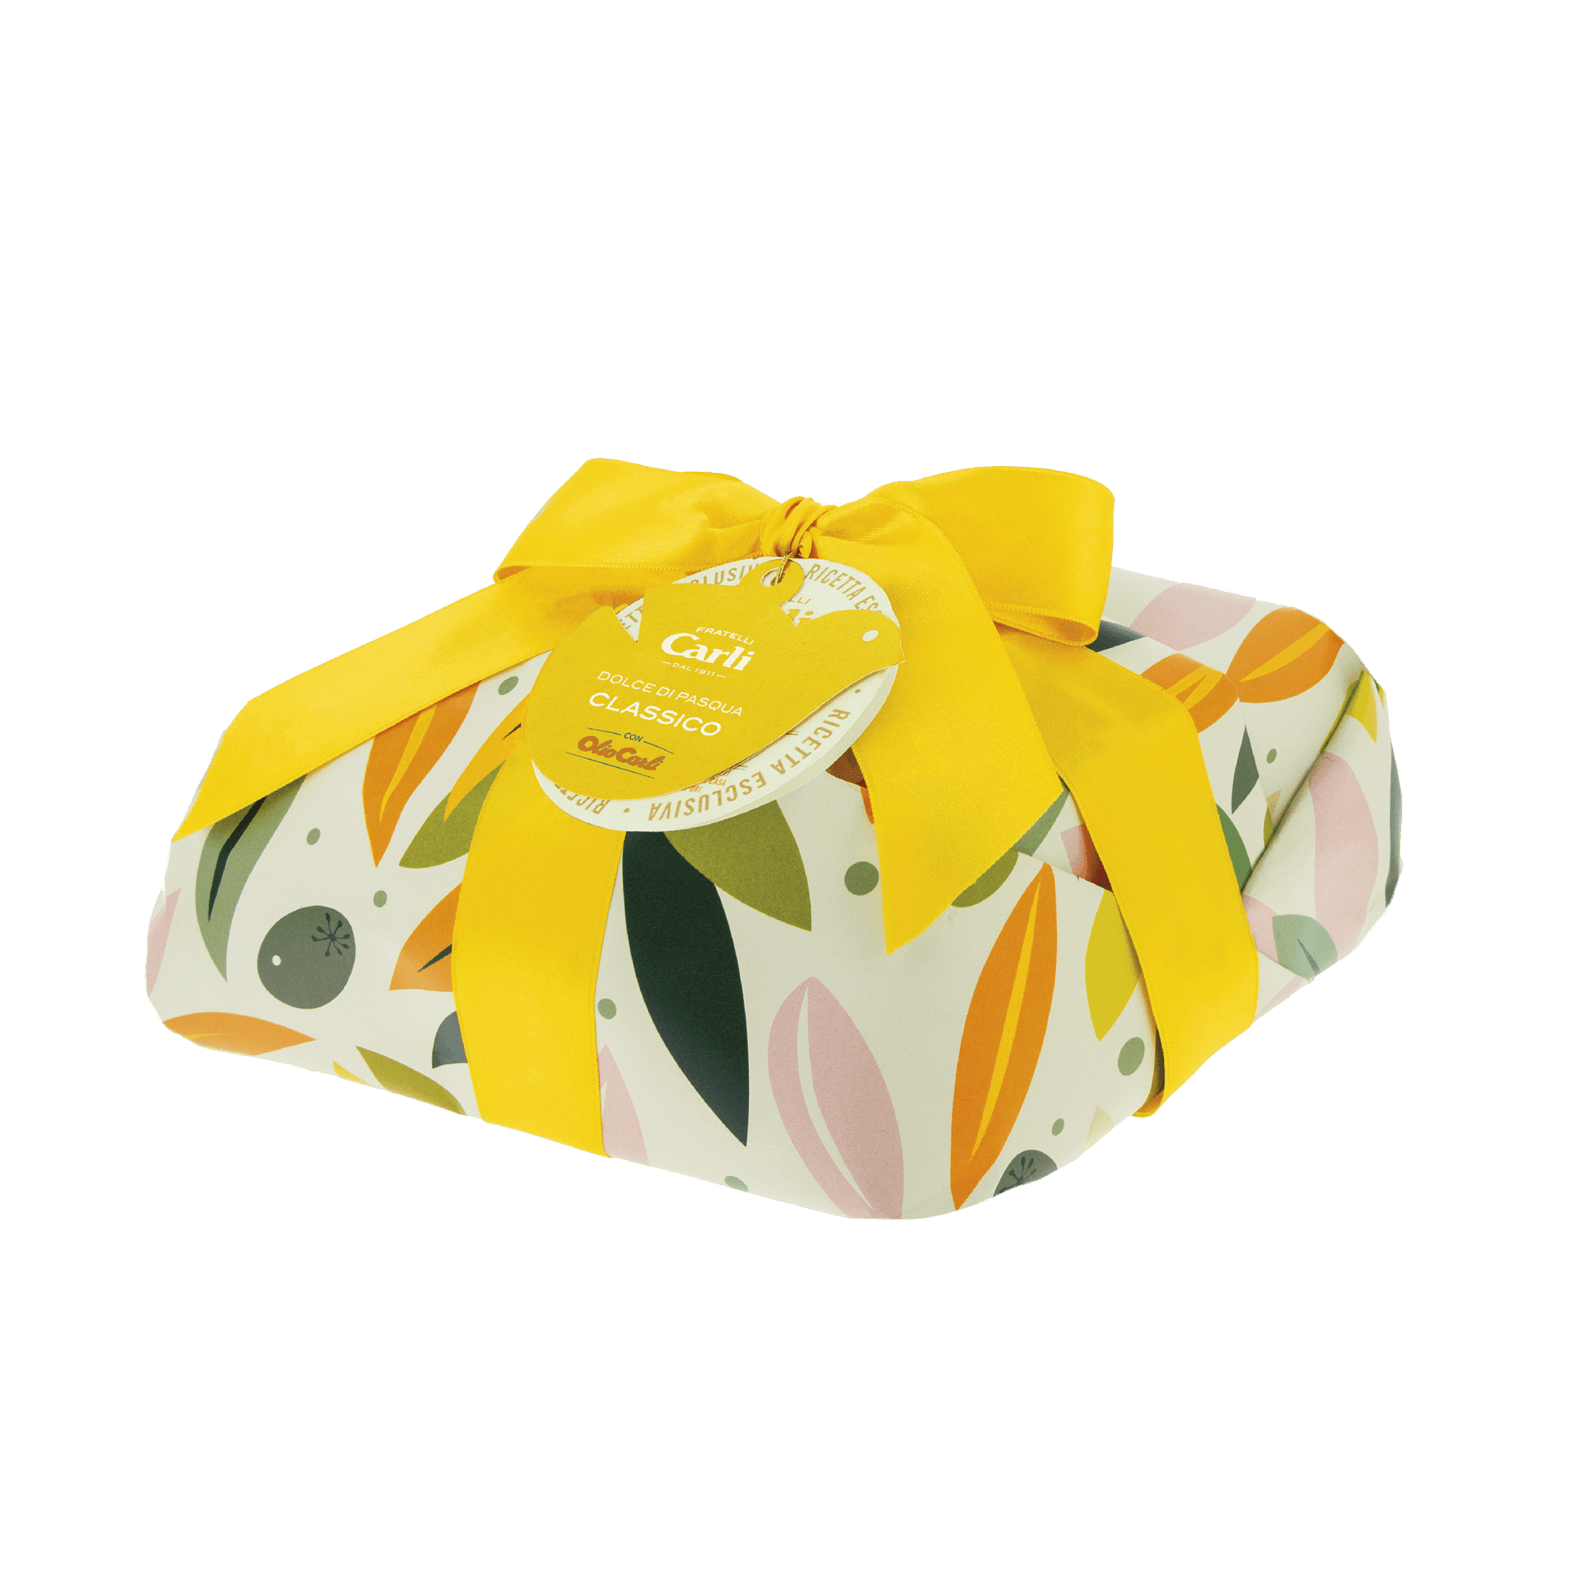 Colomba with Olive Oil